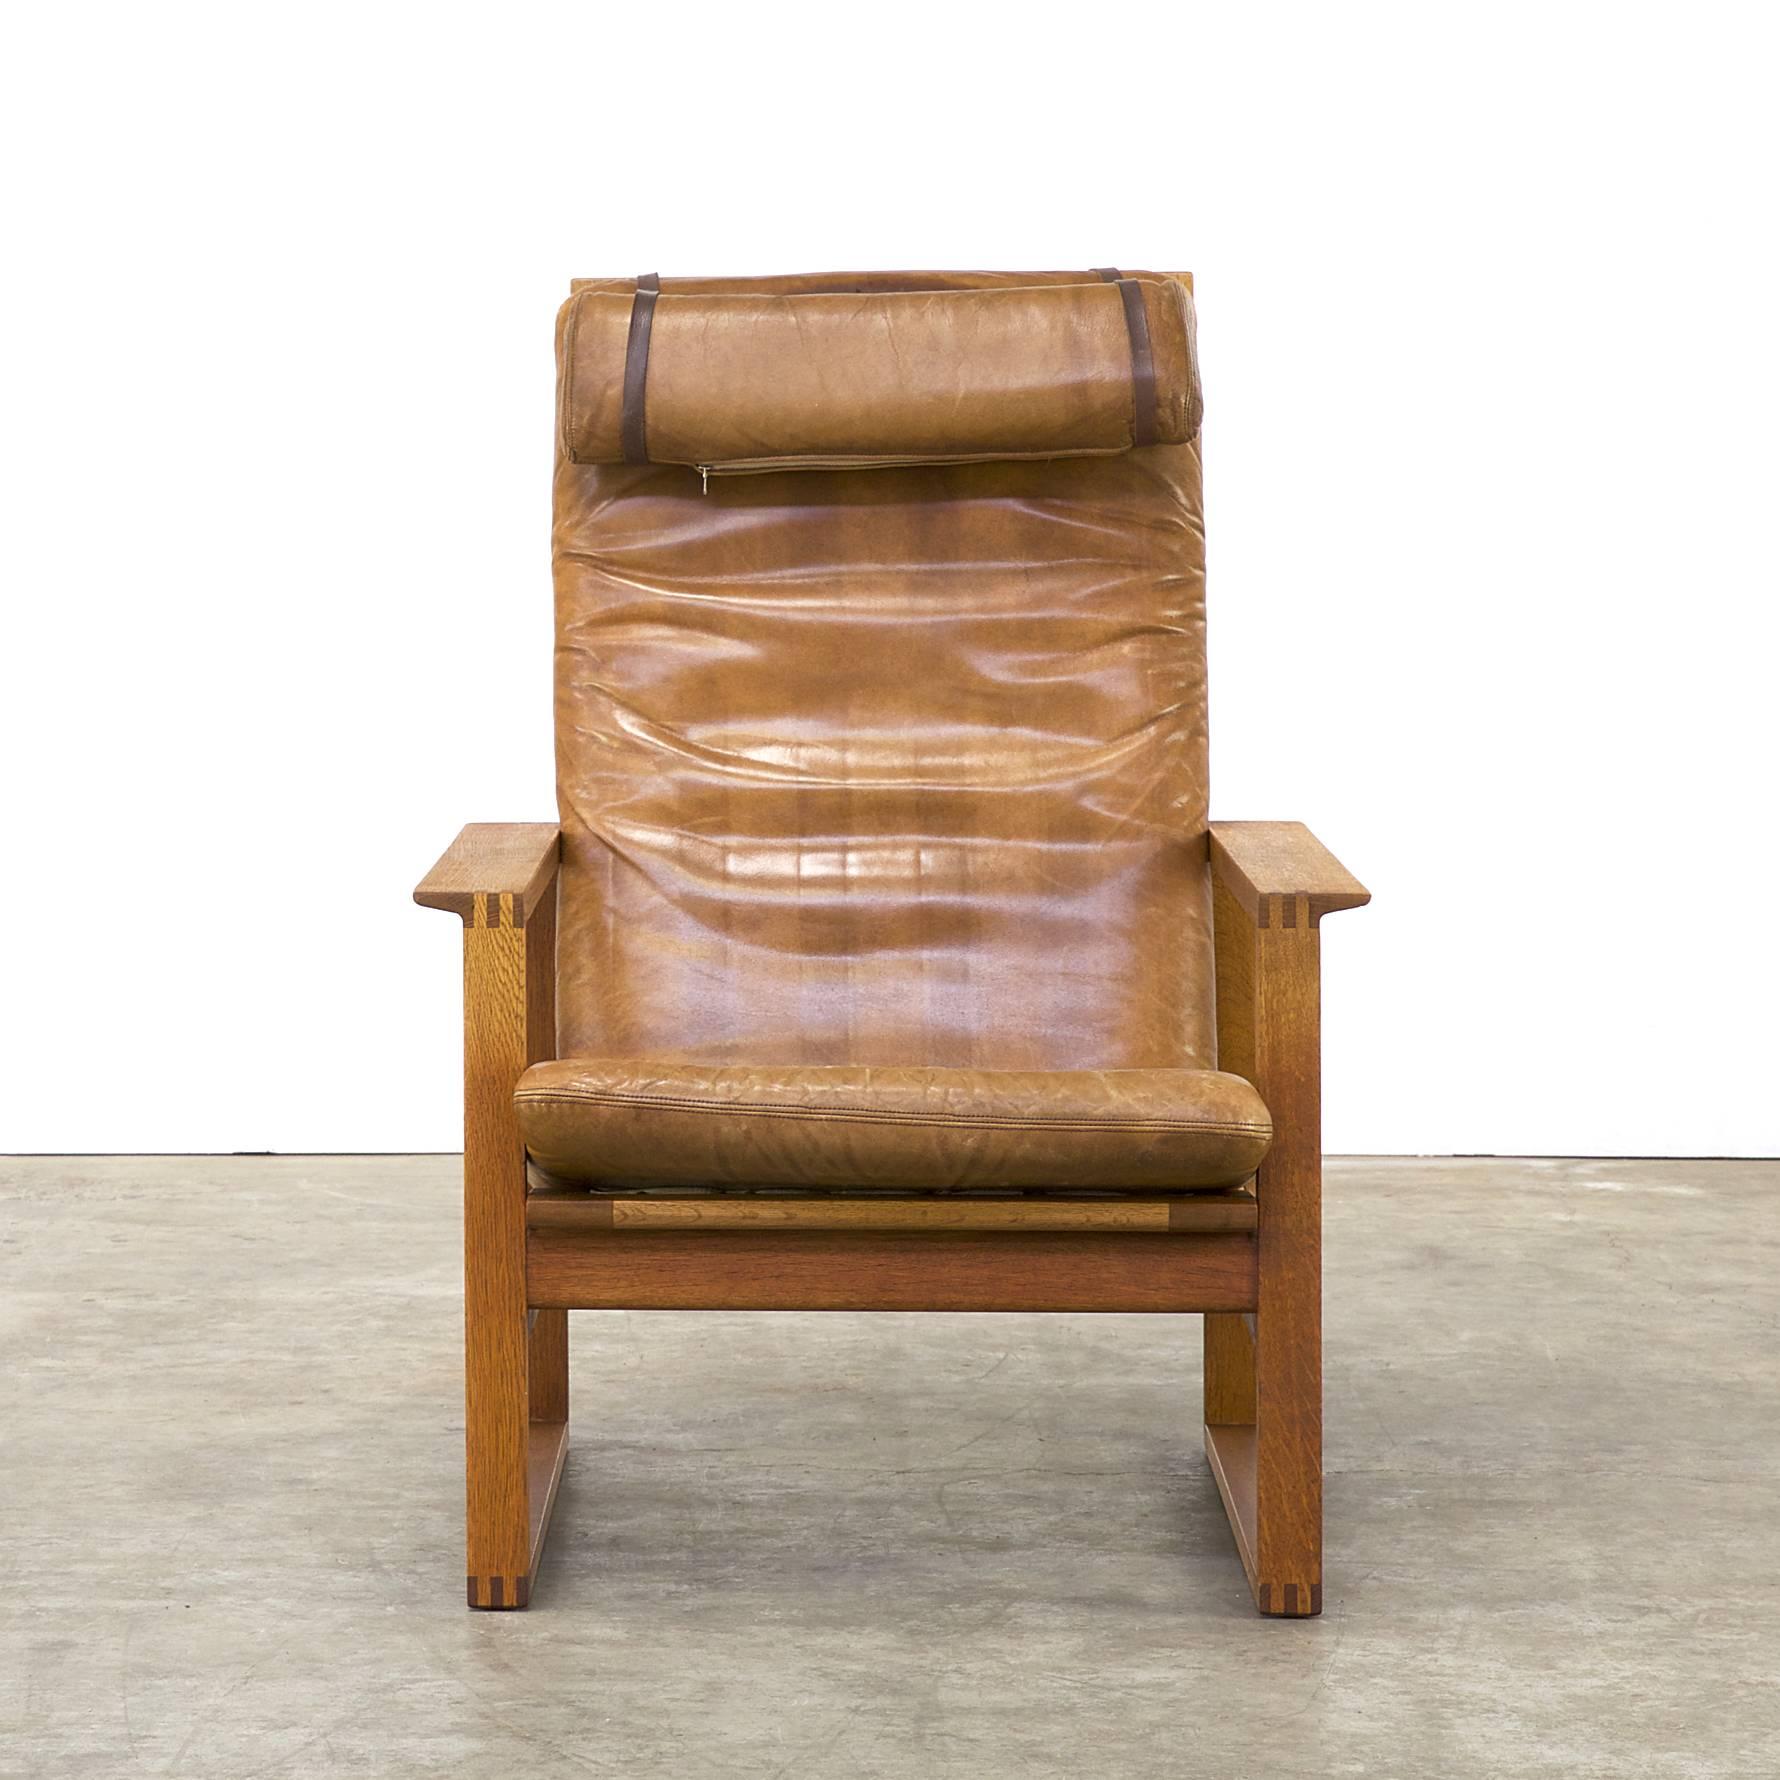 1970s Borge Mogensen fauteuil for Fredericia Stolefabrik, brown leather, very good condition. Consistent with age and use.